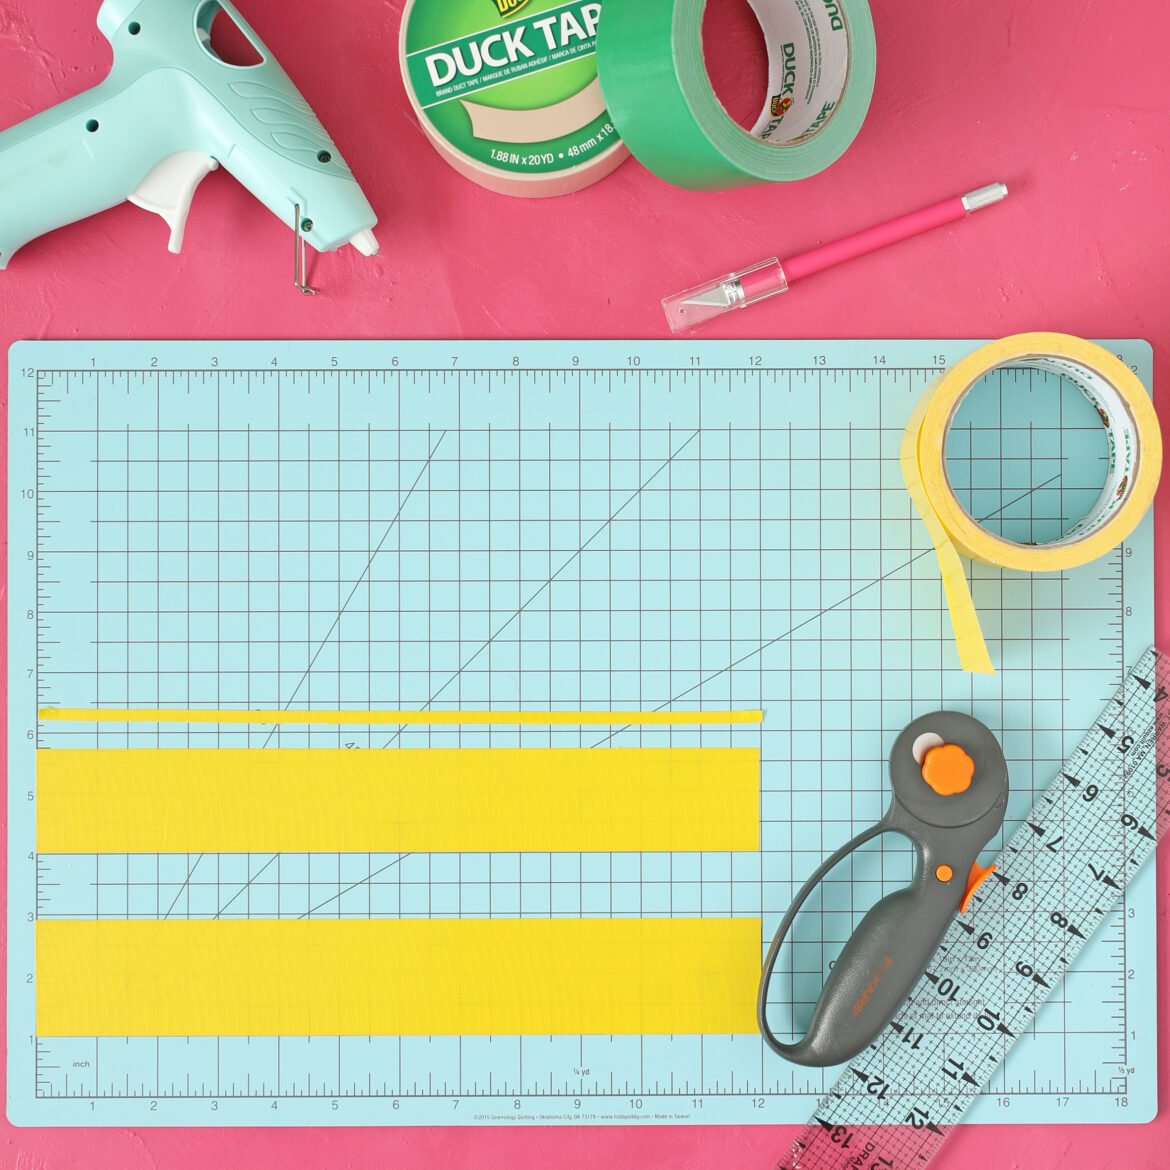 Two strips of yellow Duck Tape with crafting supplies.